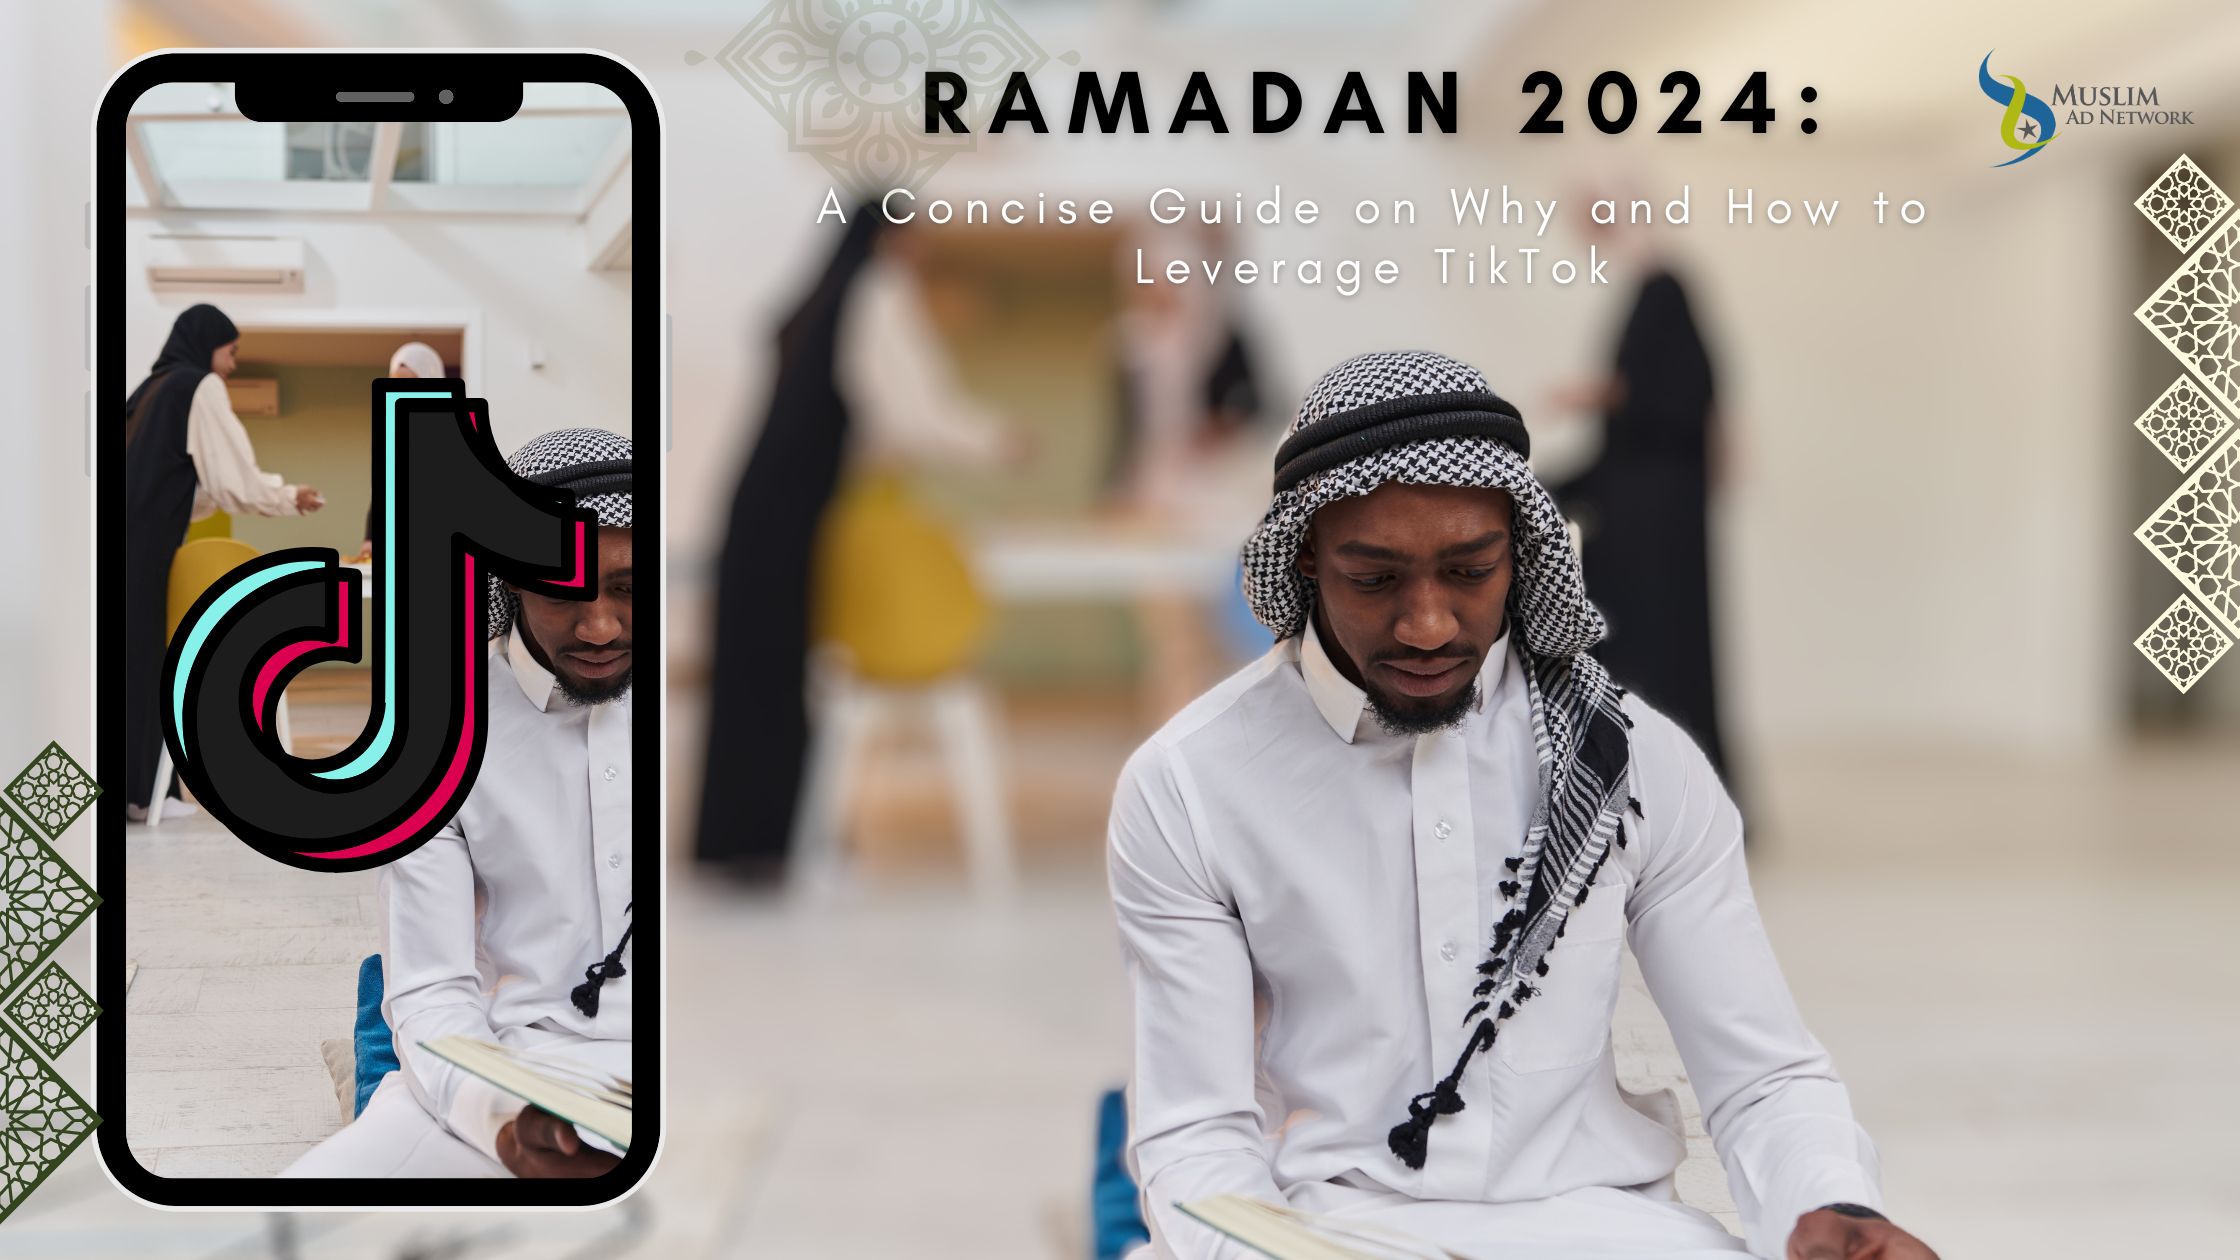 Ramadan 2024: A Concise Guide on Why and How to Leverage TikTok